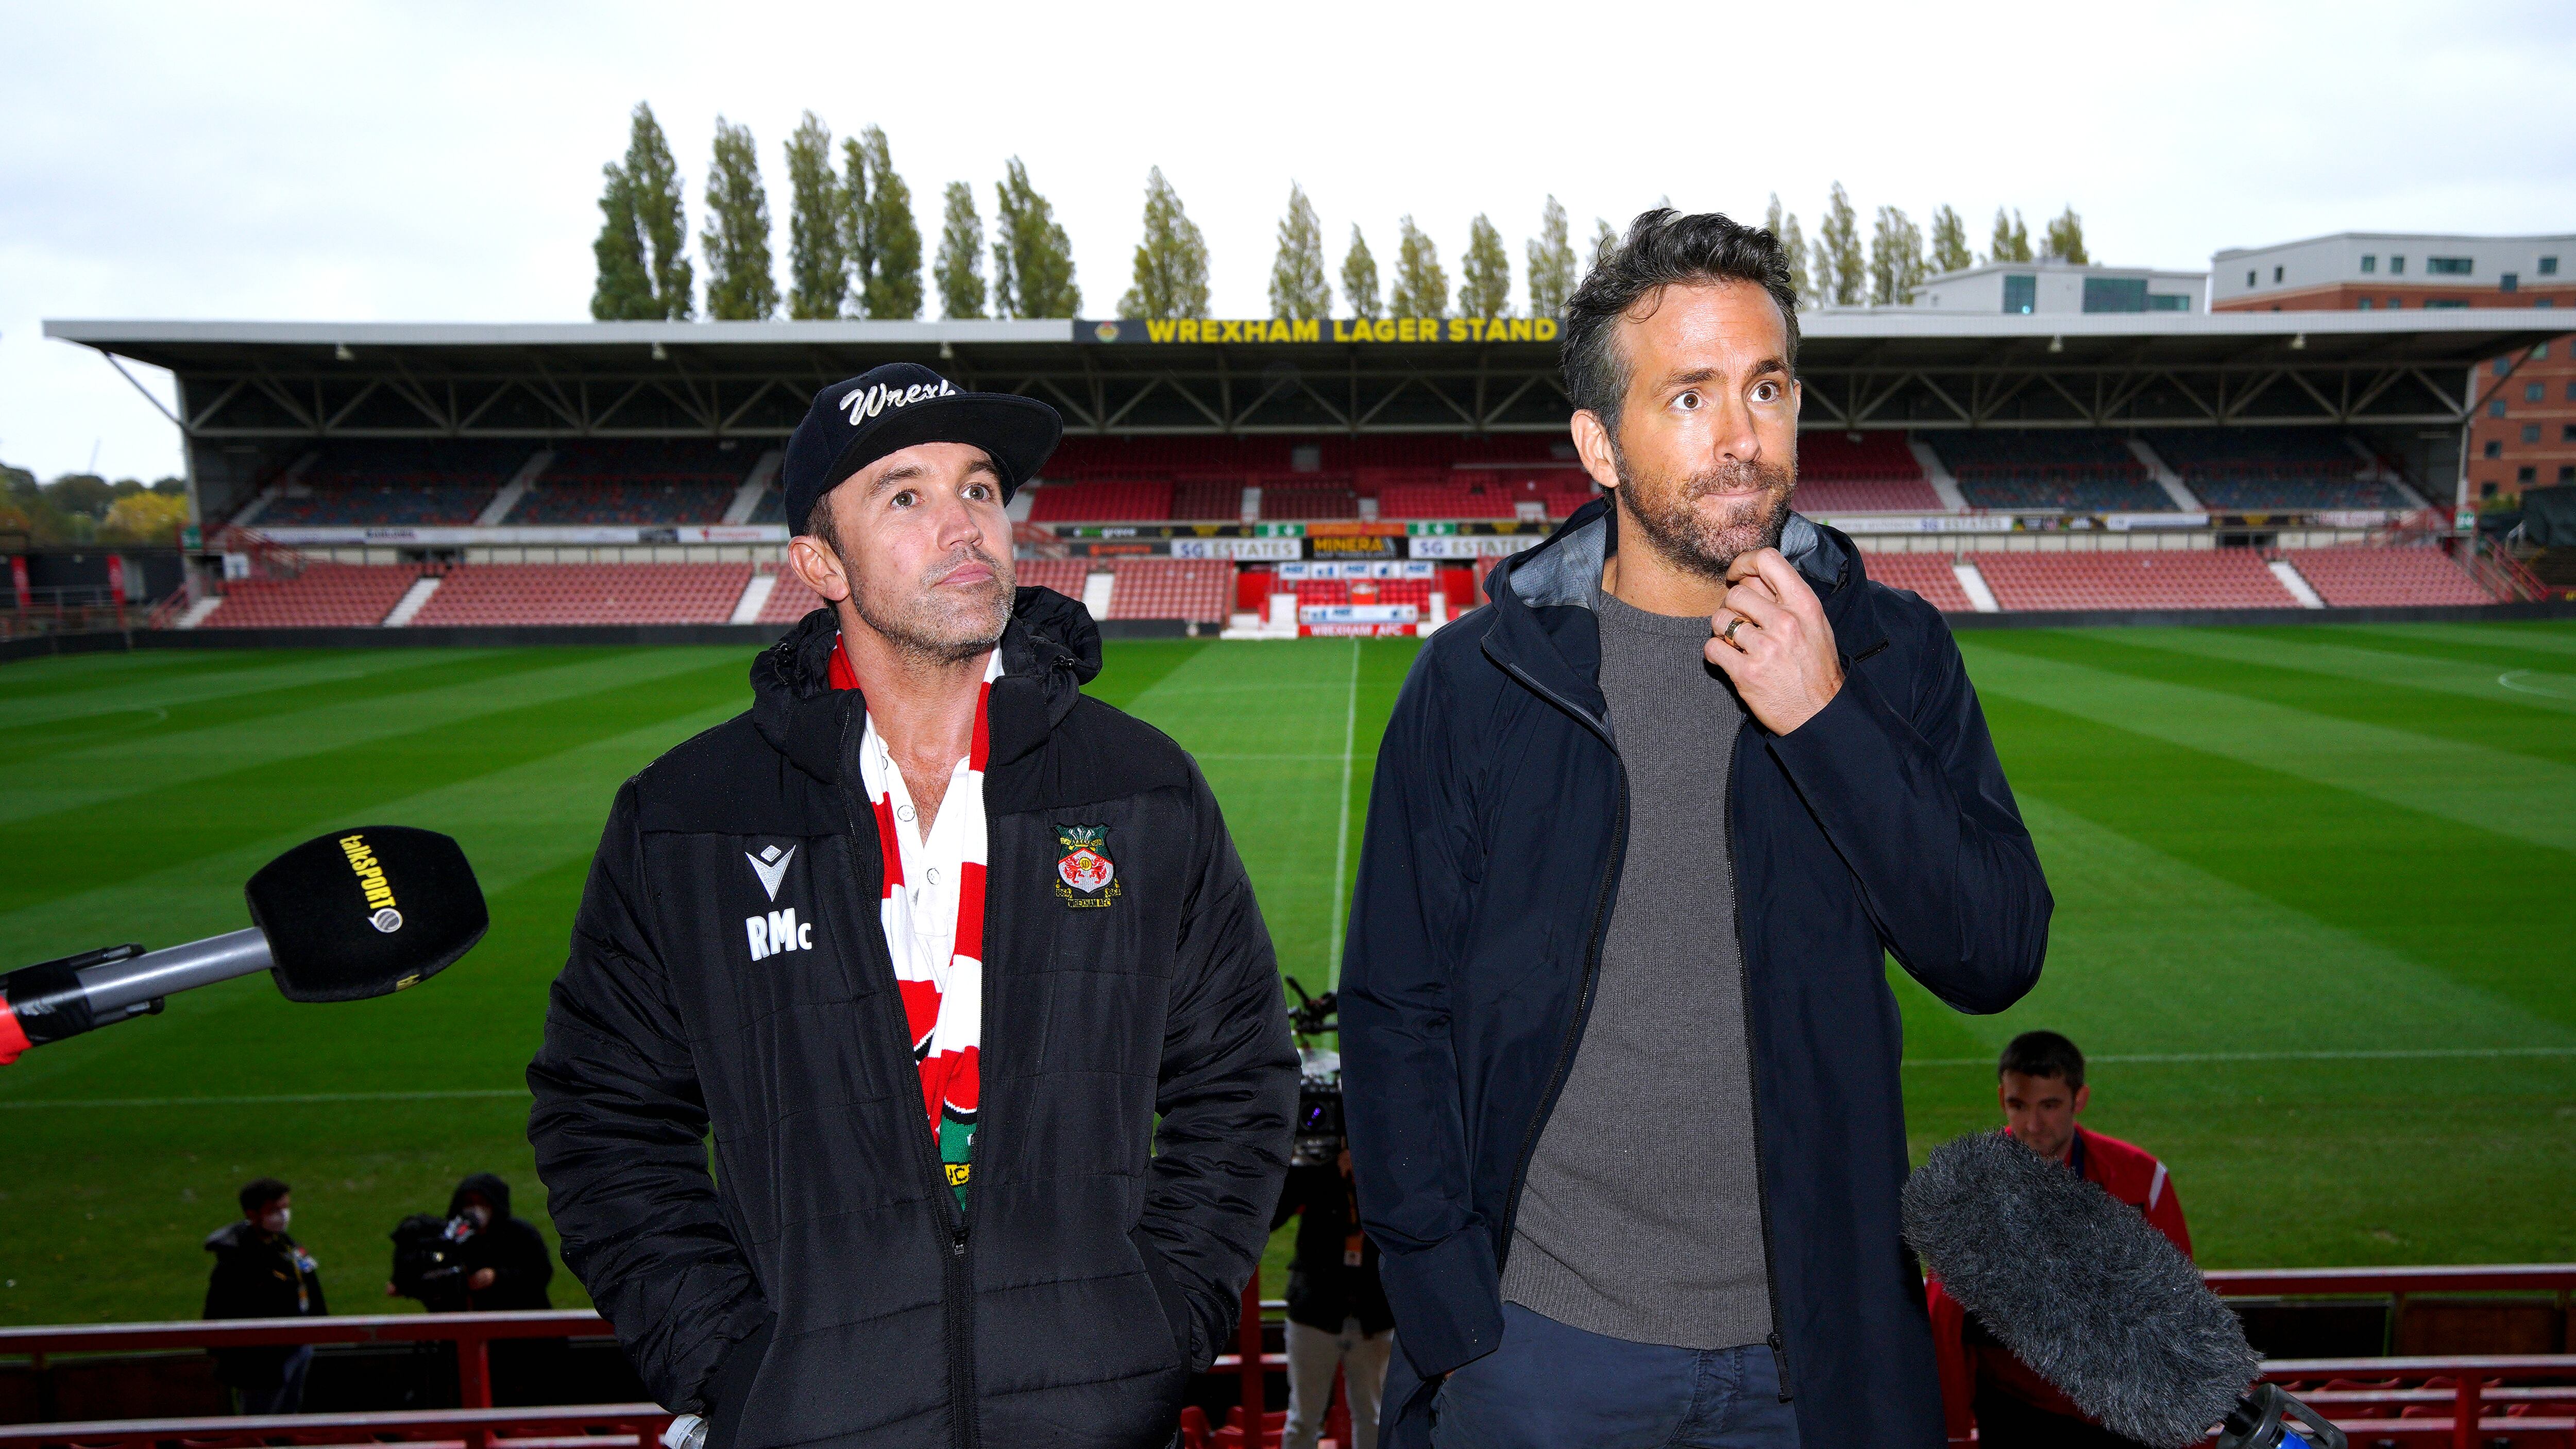 Wrexham owners Rob Elhenney (left) and Ryan Reynolds have ambitious plans to develop the ground so “the whole town could come to a game”